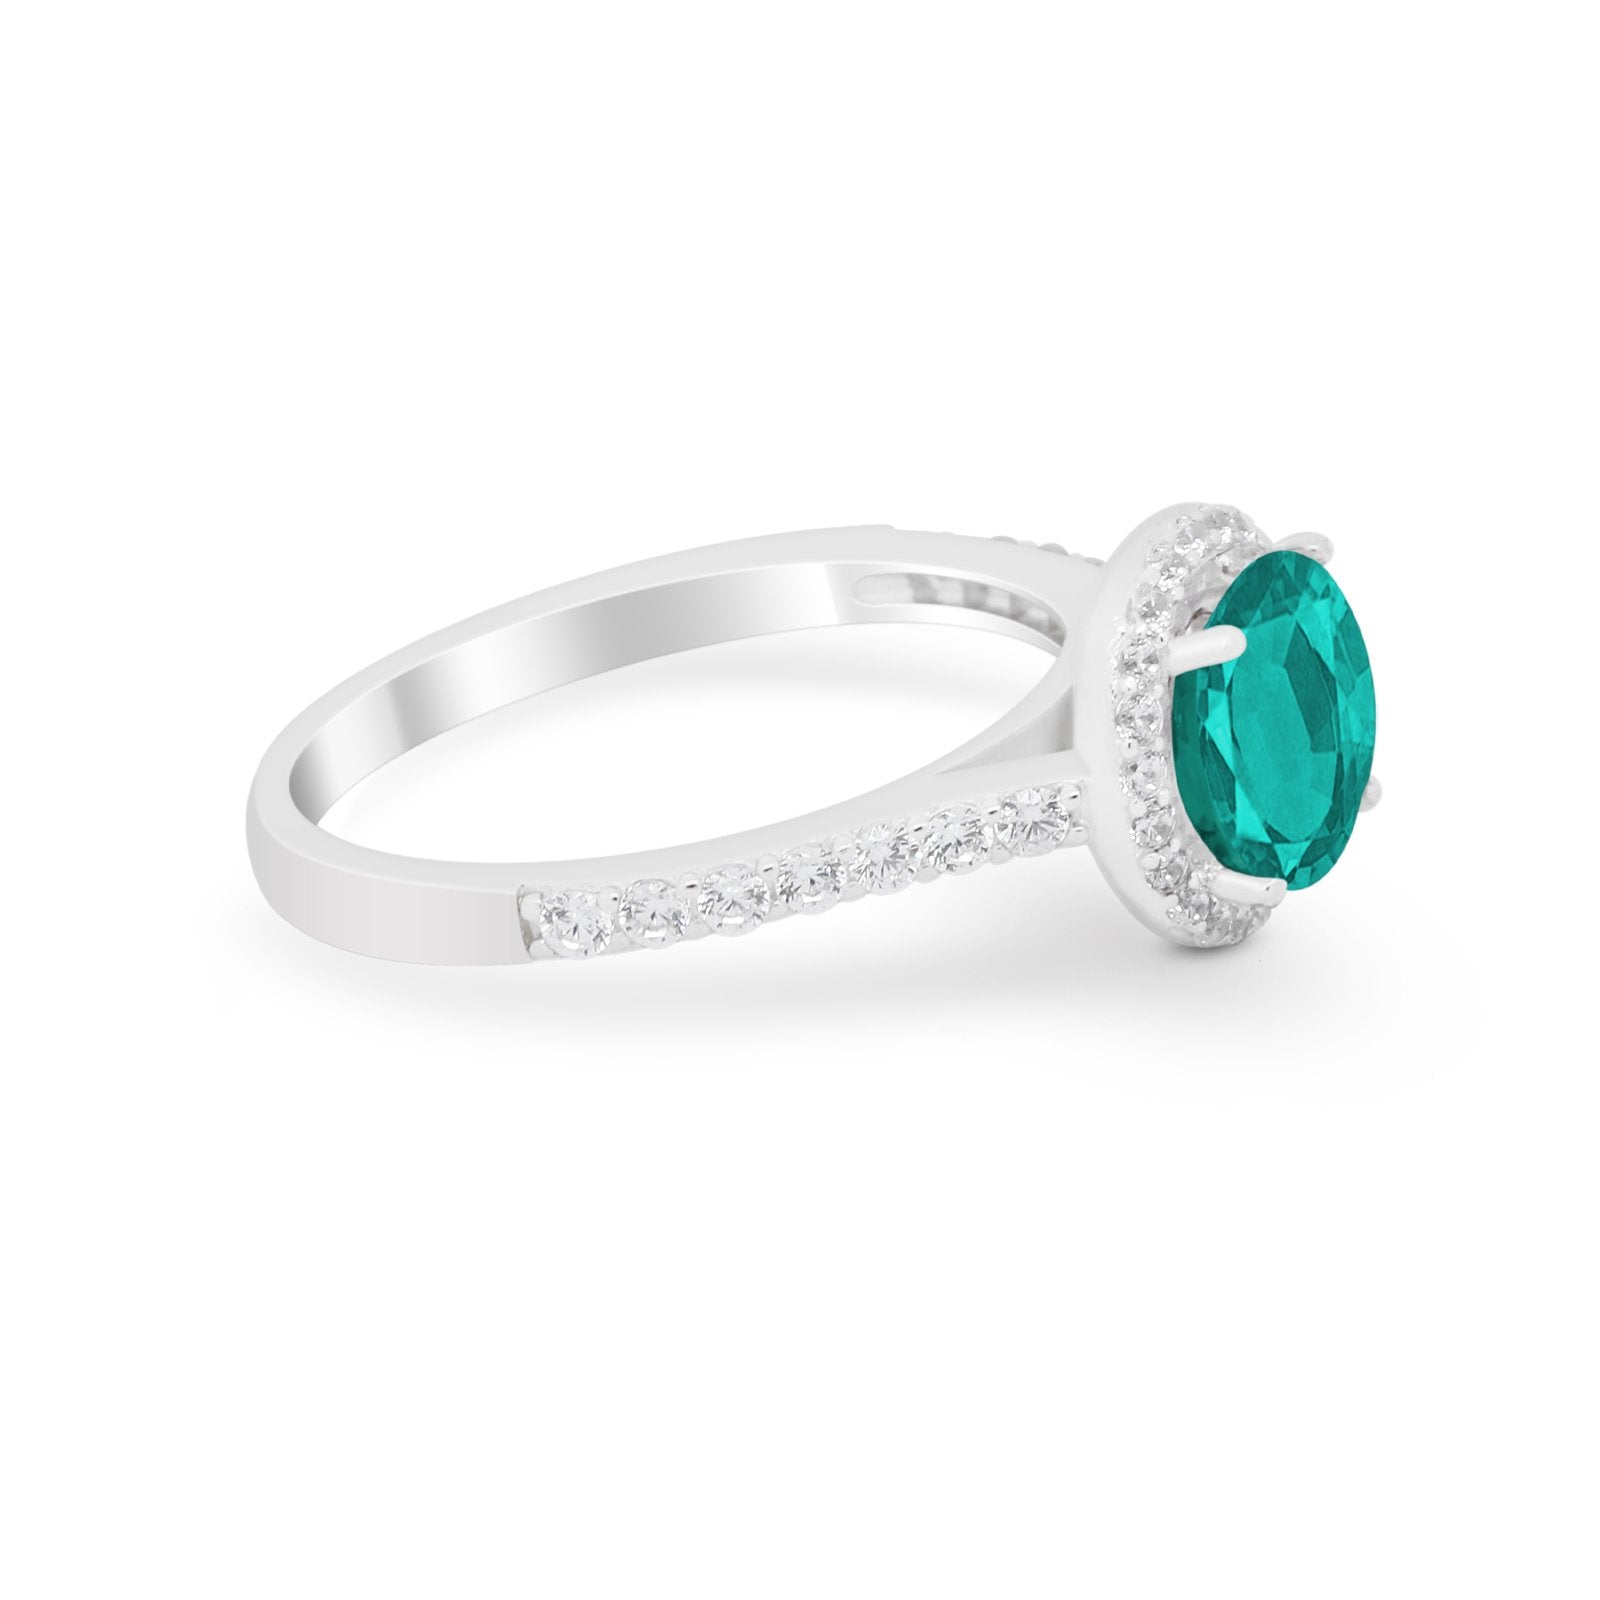 Accent Dazzling Wedding Ring Simulated Paraiba Tourmaline CZ 925 Sterling Silver